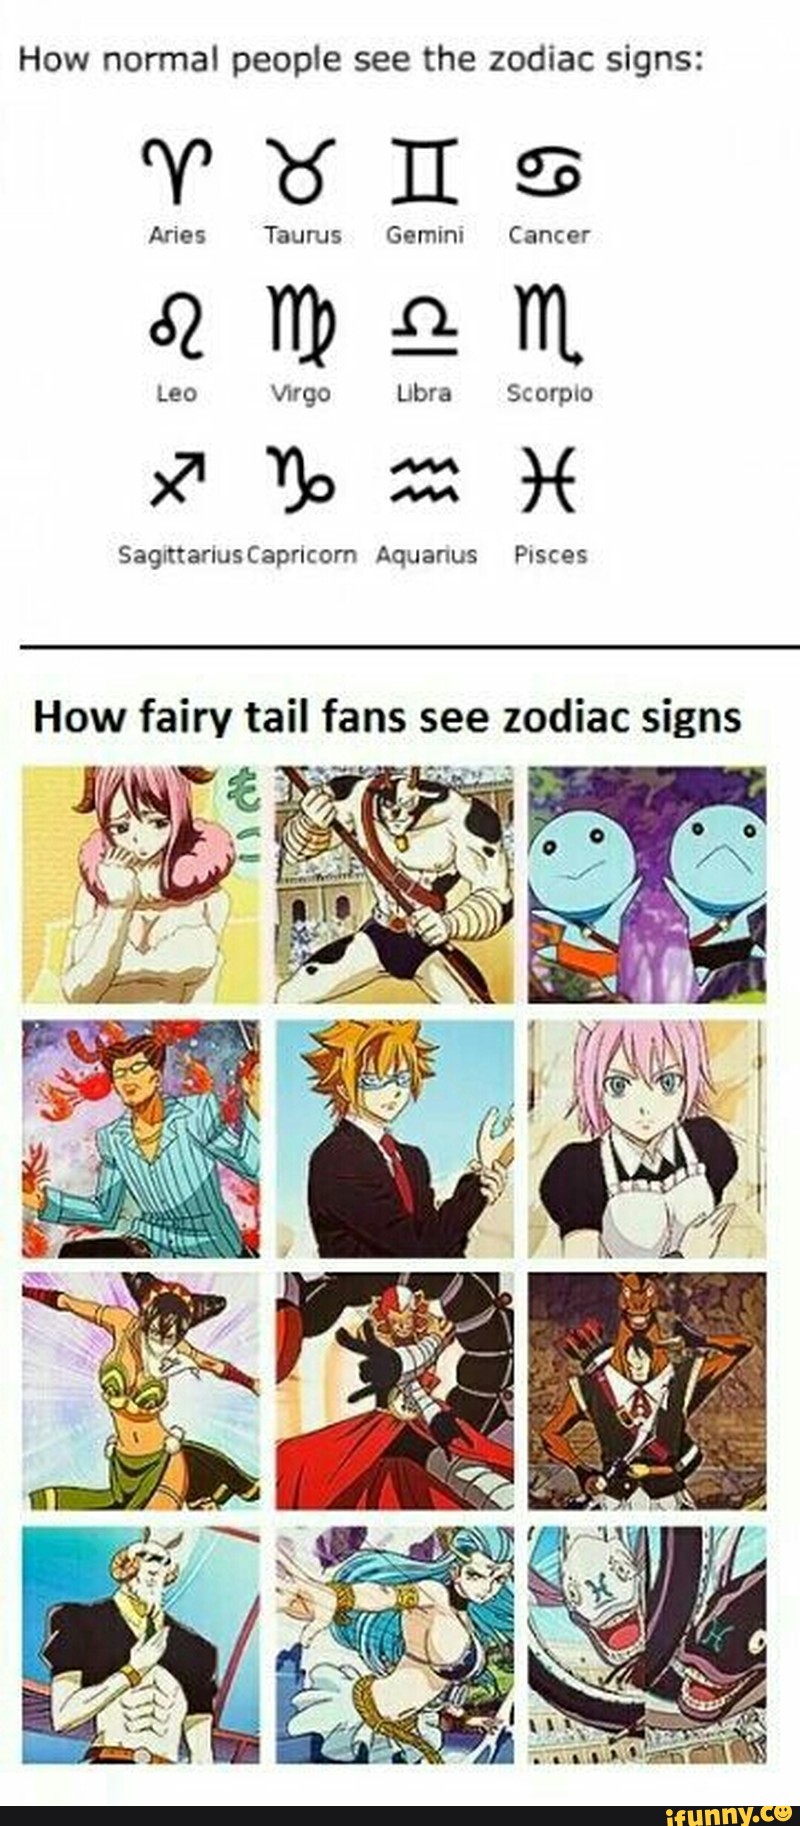 How Normal People See The Zodiac Signs Aries Taurus Gemm Cancer Leo Virgo Libra Scorpco How Fairy Tail Fans See Zodiac Signs